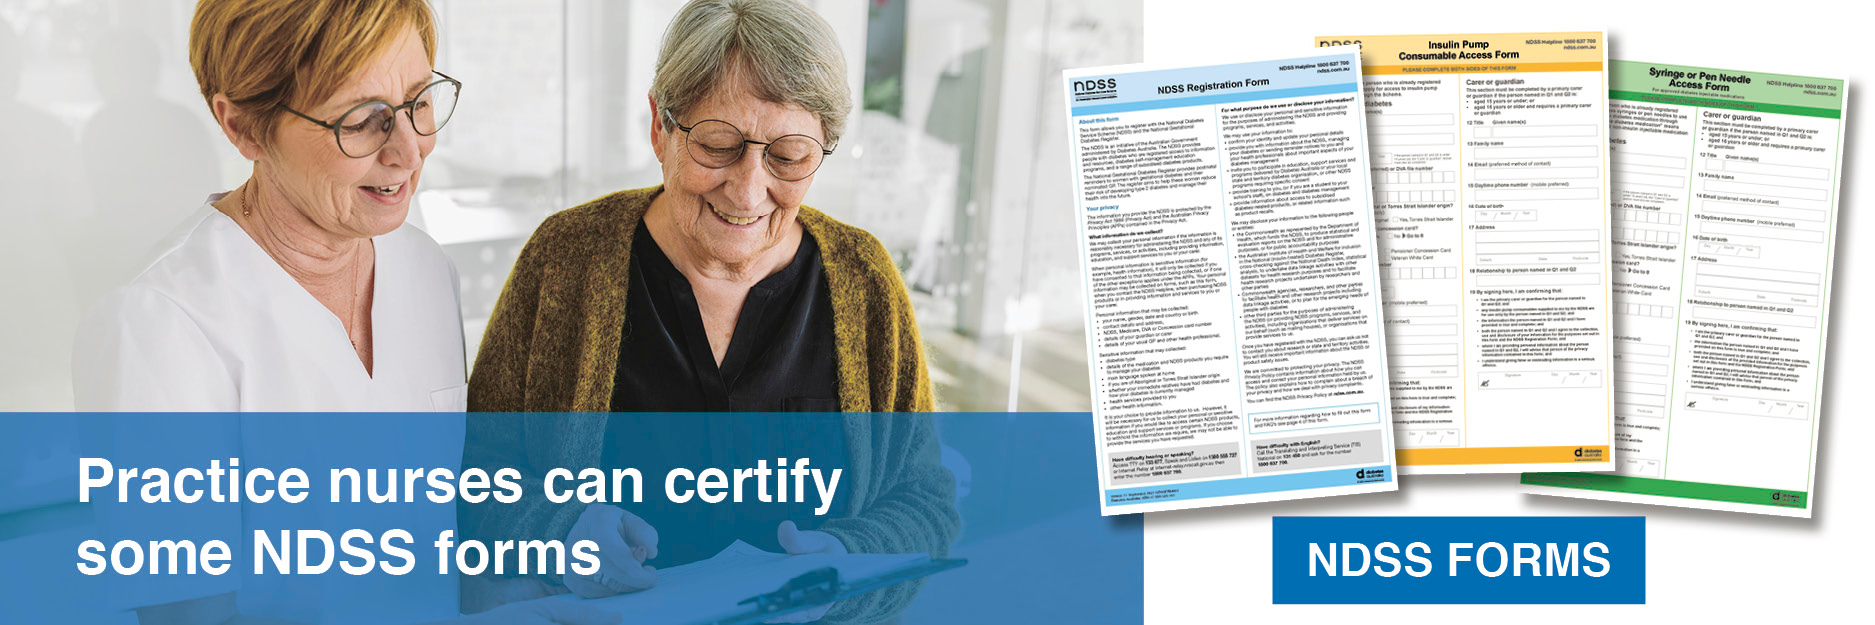 Practice nurses can certify some NDSS forms